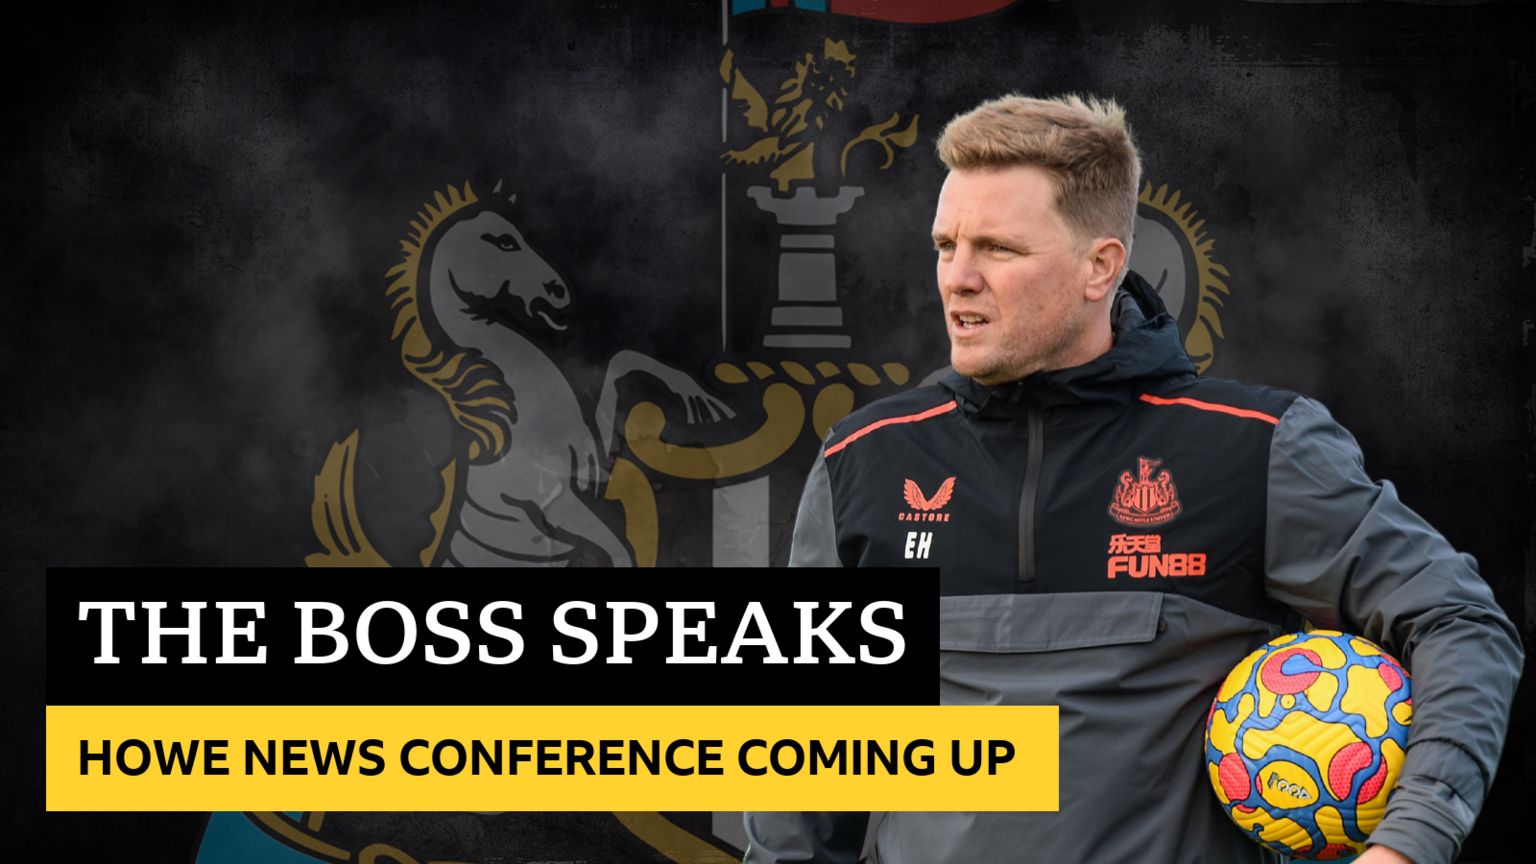 Eddie Howe news conference coming up